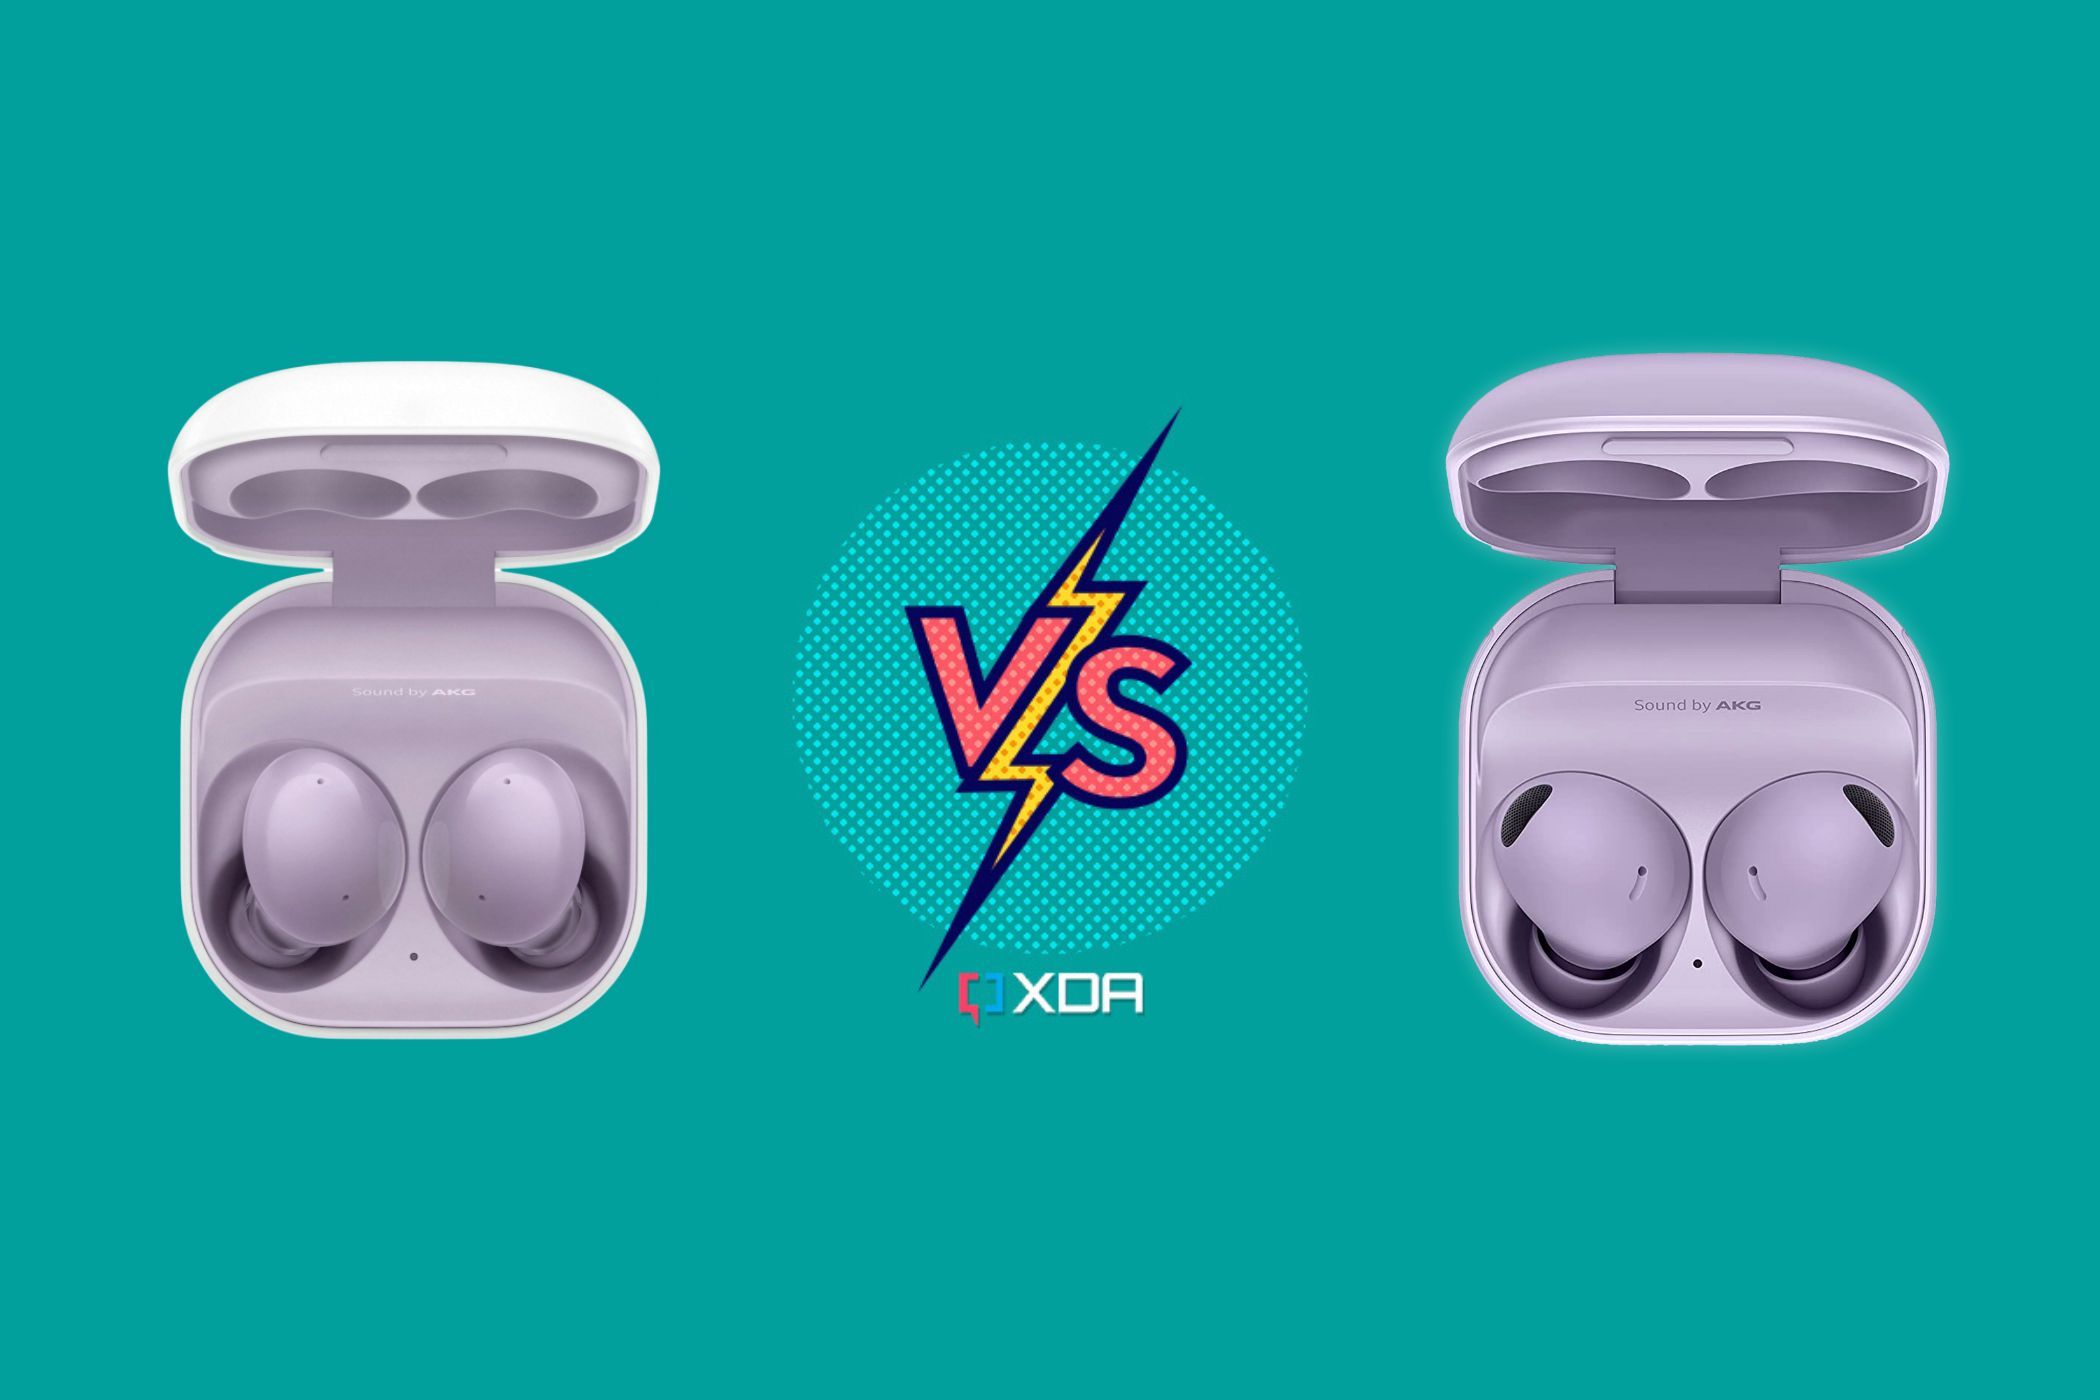 An image showing the Samsung Galaxy Buds 2 Pro and Galaxy Buds 2 earbuds with the versus illustration in the middle.